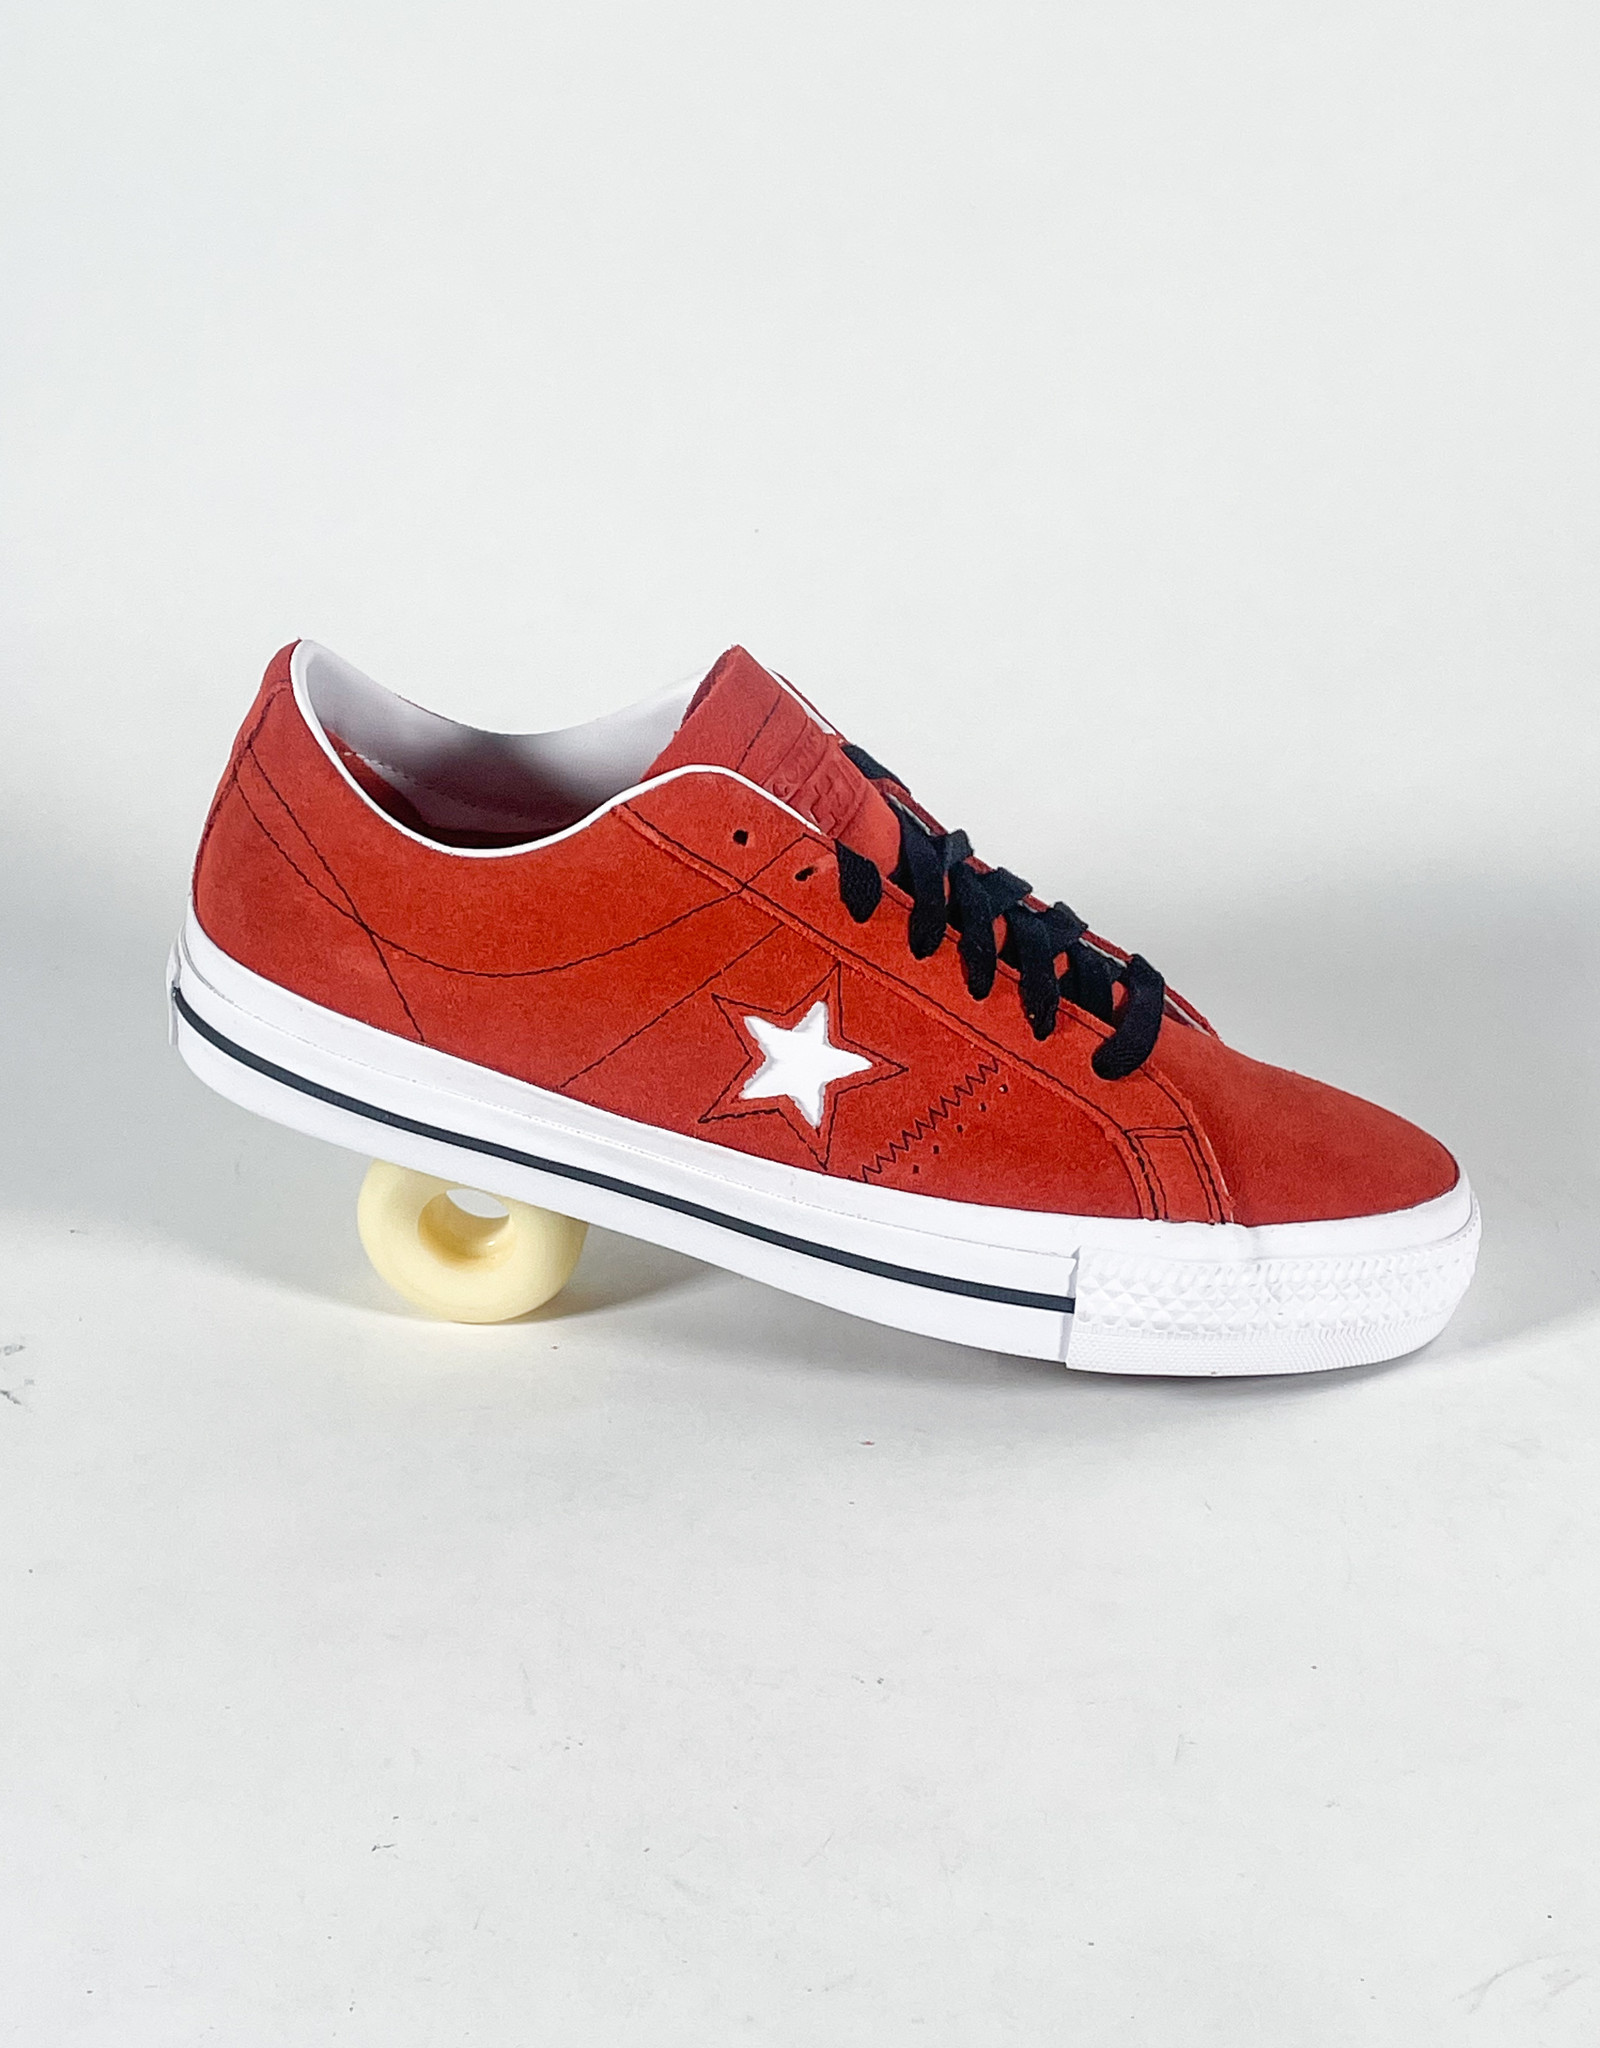 CONVERSE CONVERSE CONS ONE STAR PRO OX - FIRE OPAL/BLACK/WHITE